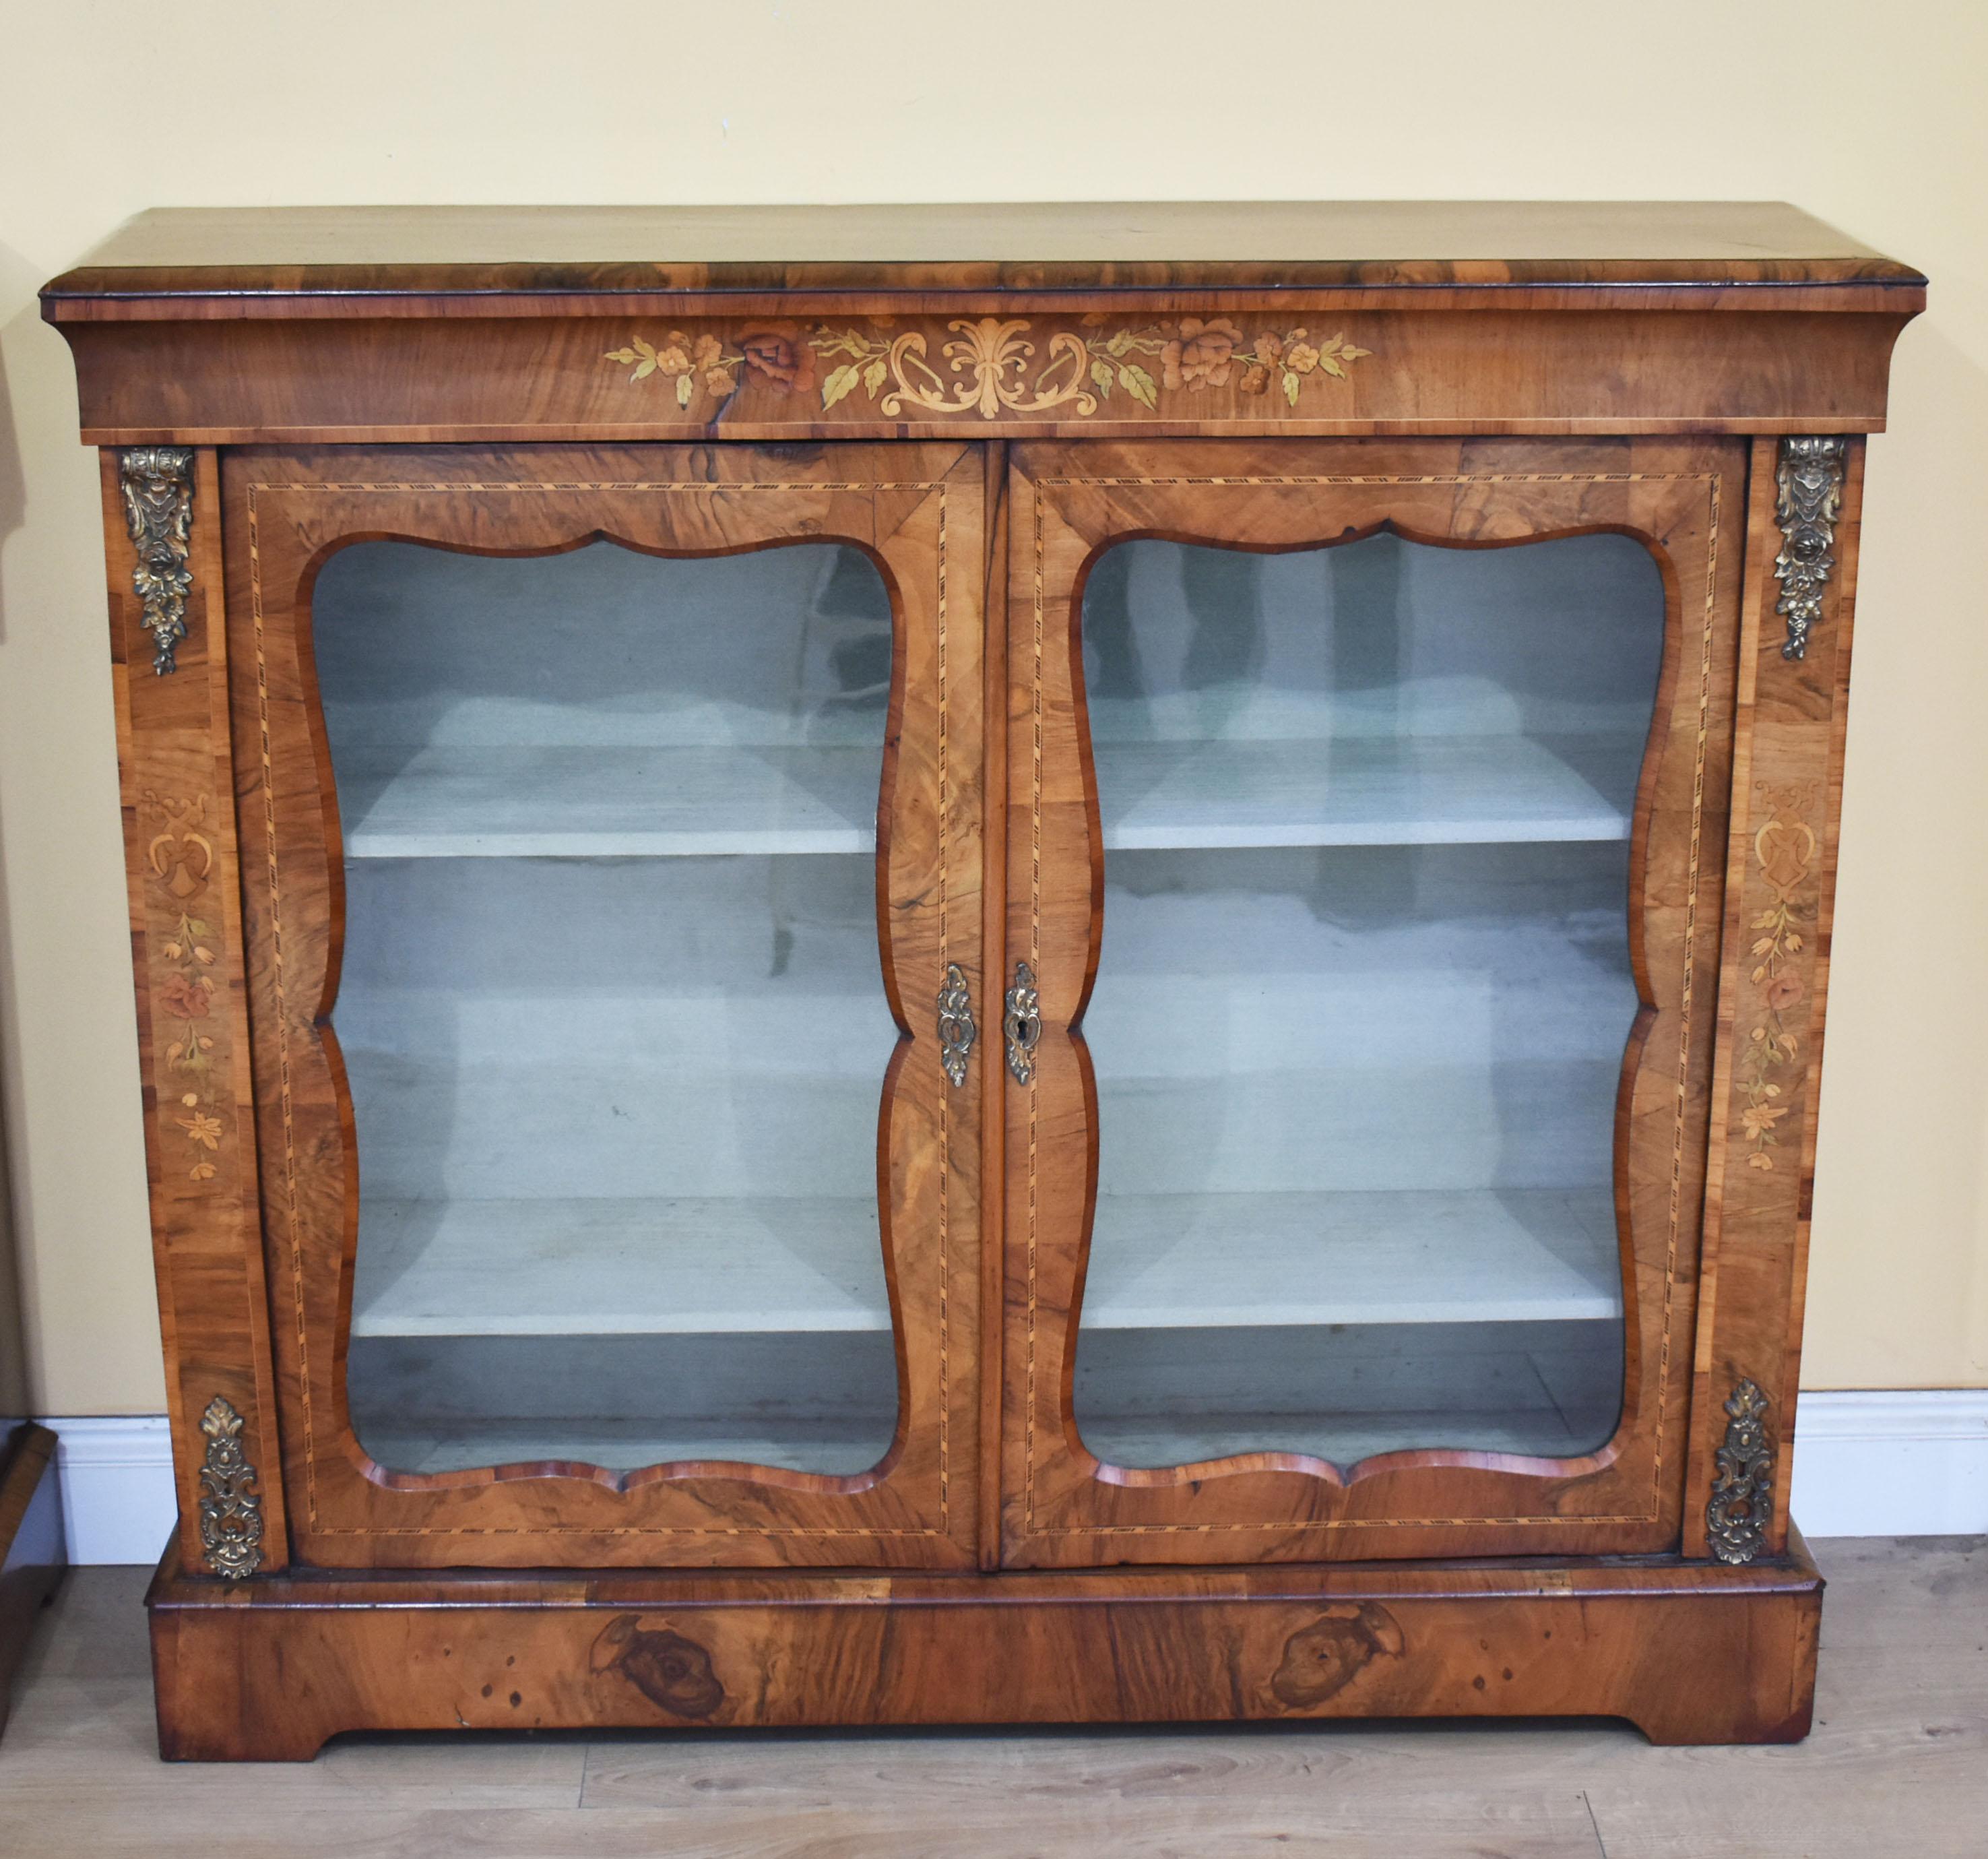 For sale is a good quality pair of Victorian walnut pier cabinets. Each cabinet having floral marquetry inlay above the glazed doors, opening to reveal a fabric lined interior with two shelves. Each door is flanked by ormolu mounts at the top and